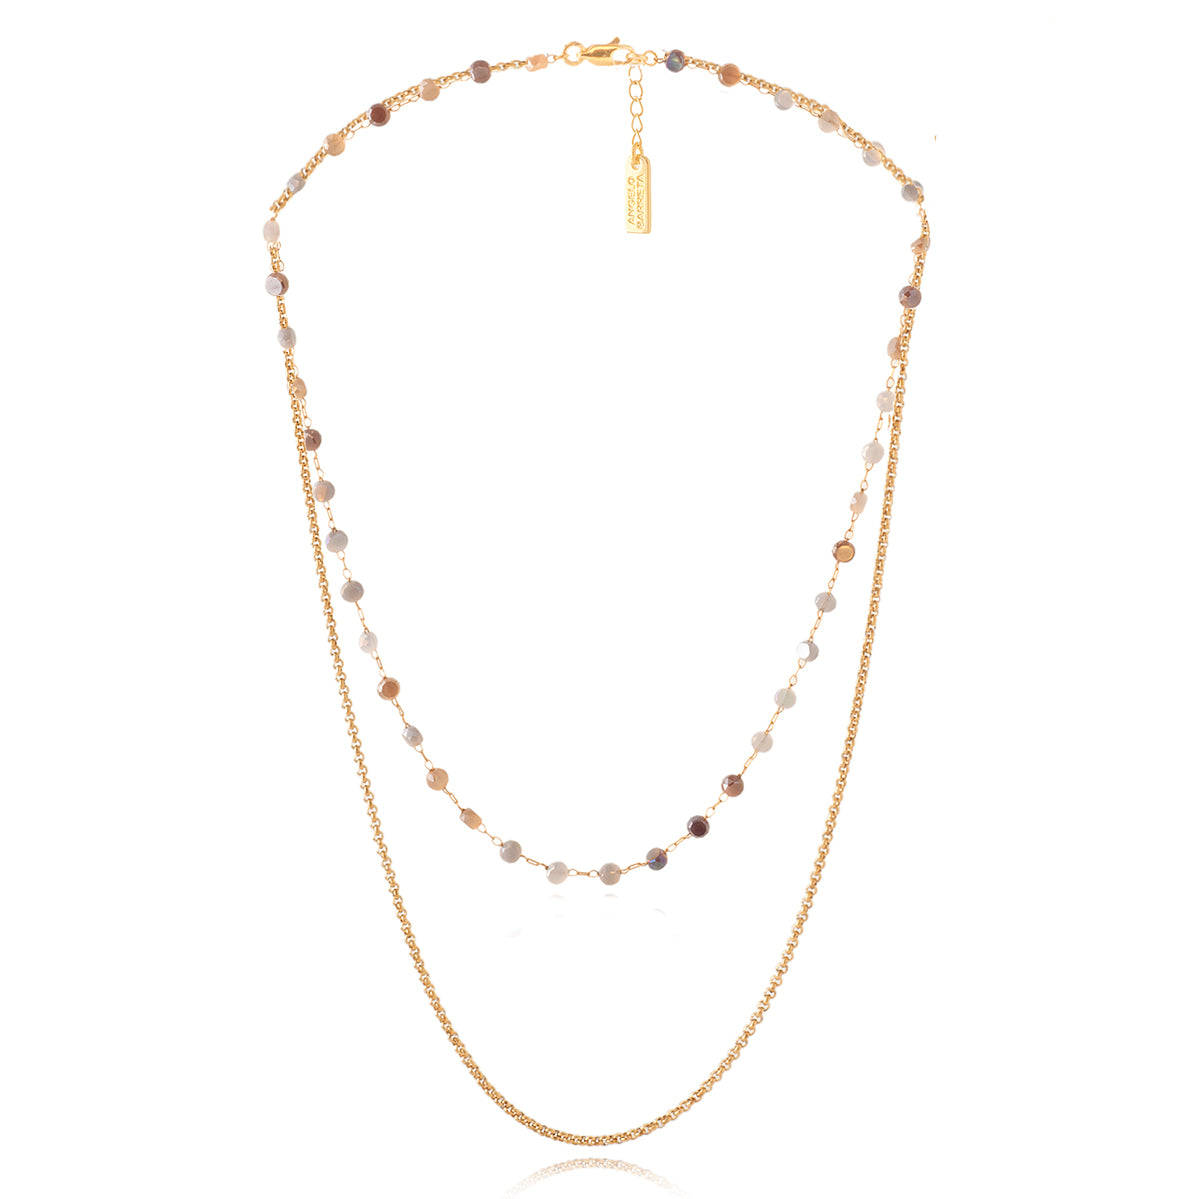 Gold Chain Double Row Necklace with Nude Glass Beads